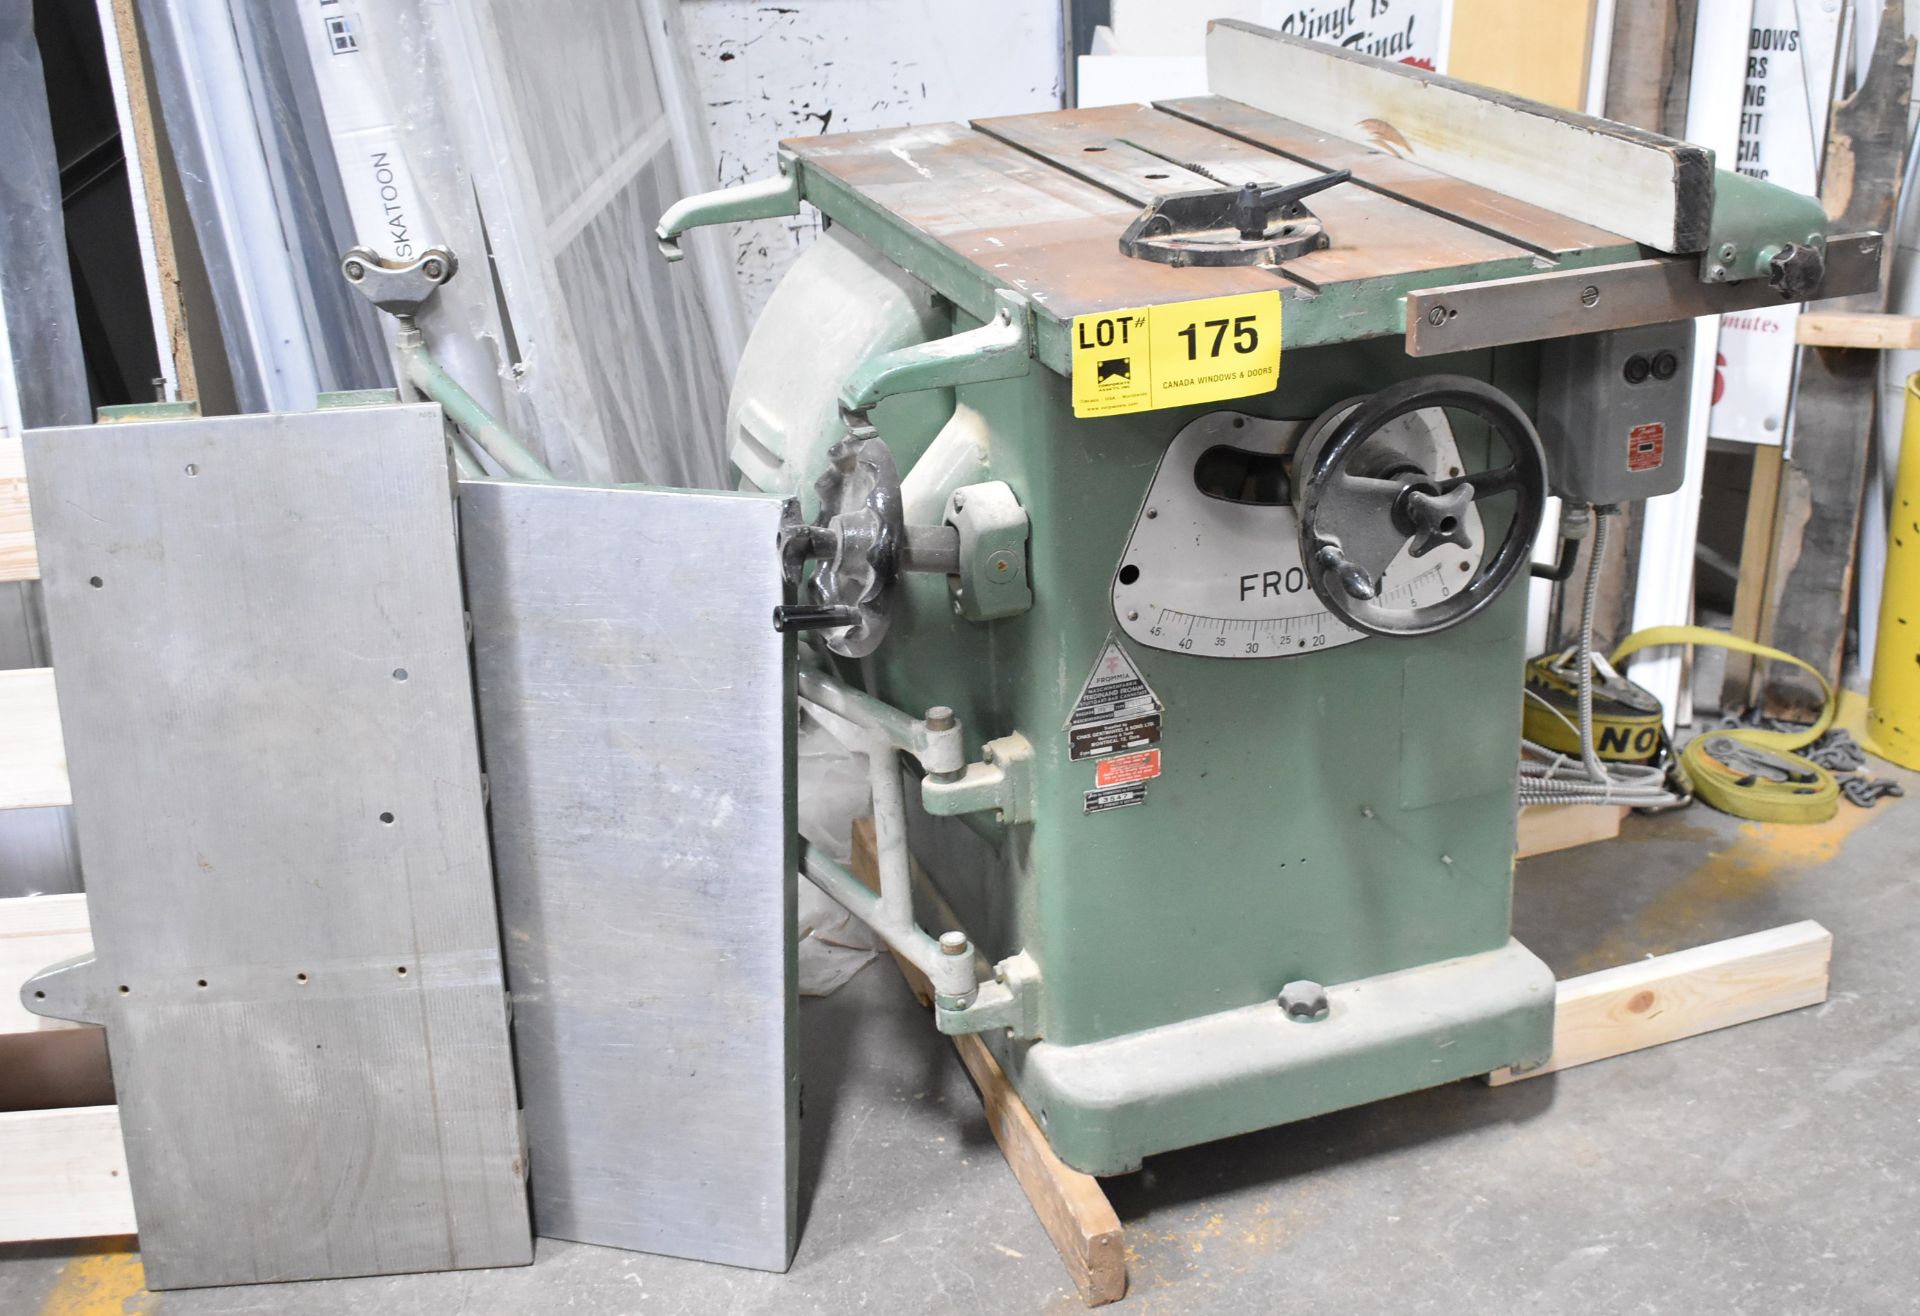 FROMMIA 635 SWING ARM TABLE SAW, S/N 1895 (LOCATED AT 119 CONSUMERS DRIVE, WHITBY, ONTARIO,